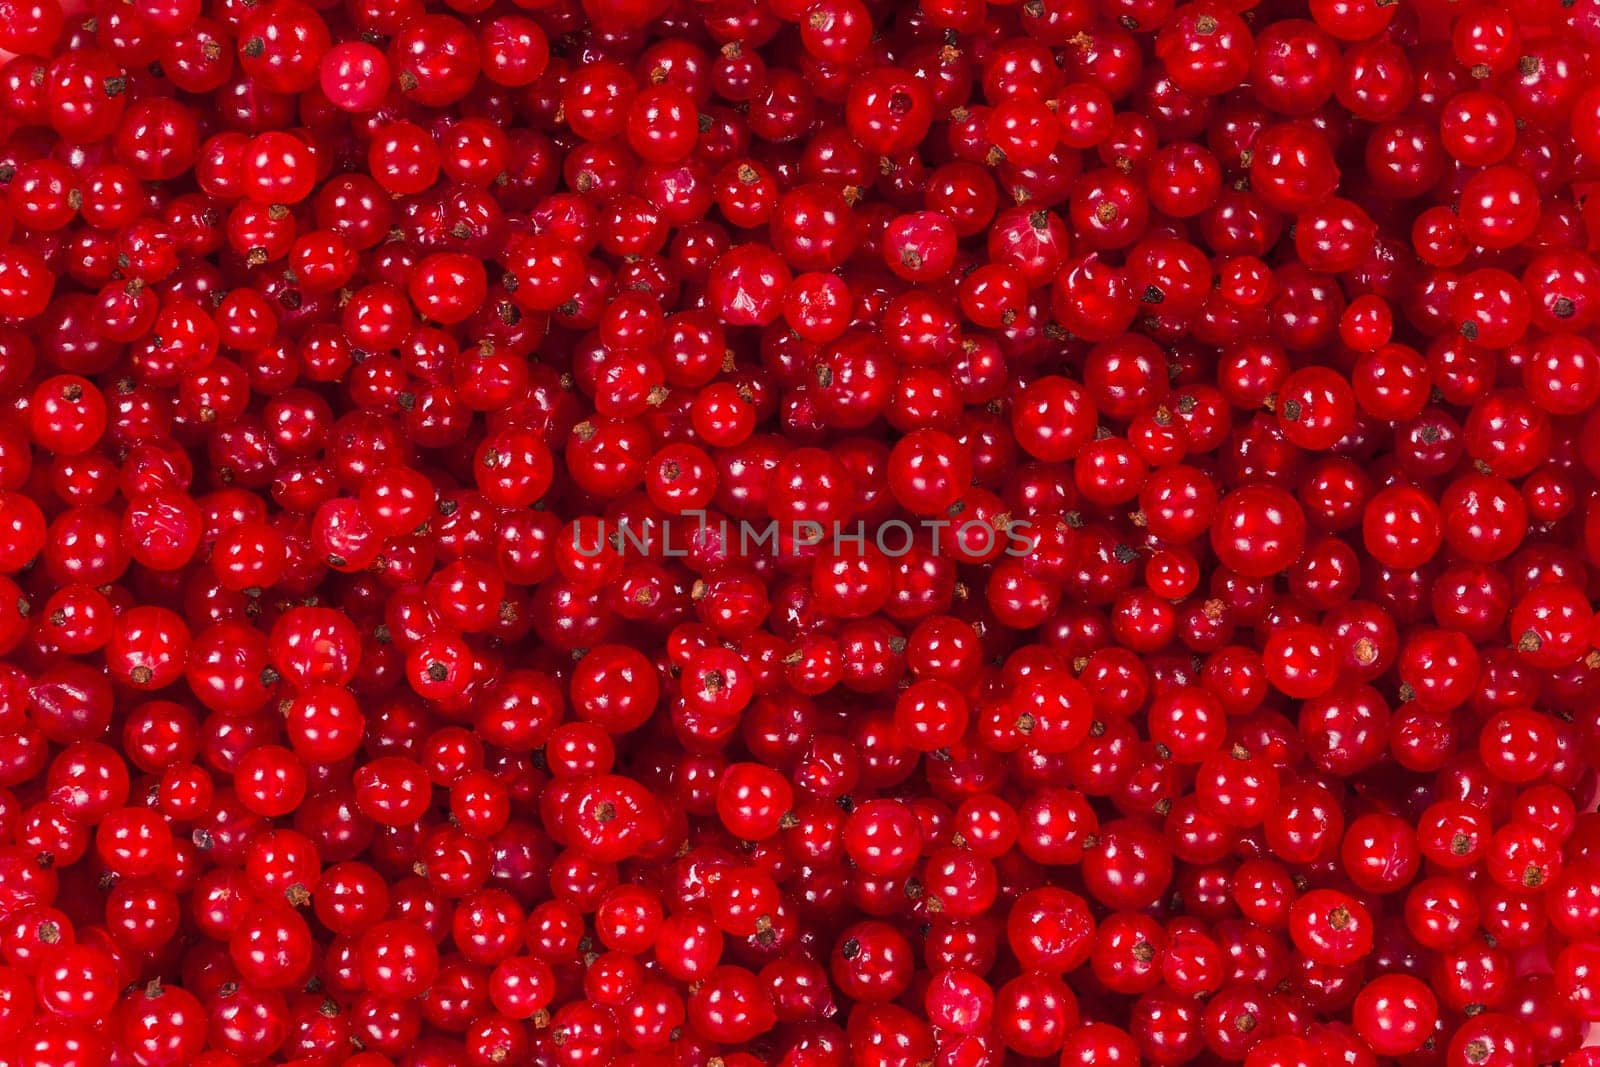 Ripe red currant berries for the whole frame close-up by ElenaNEL